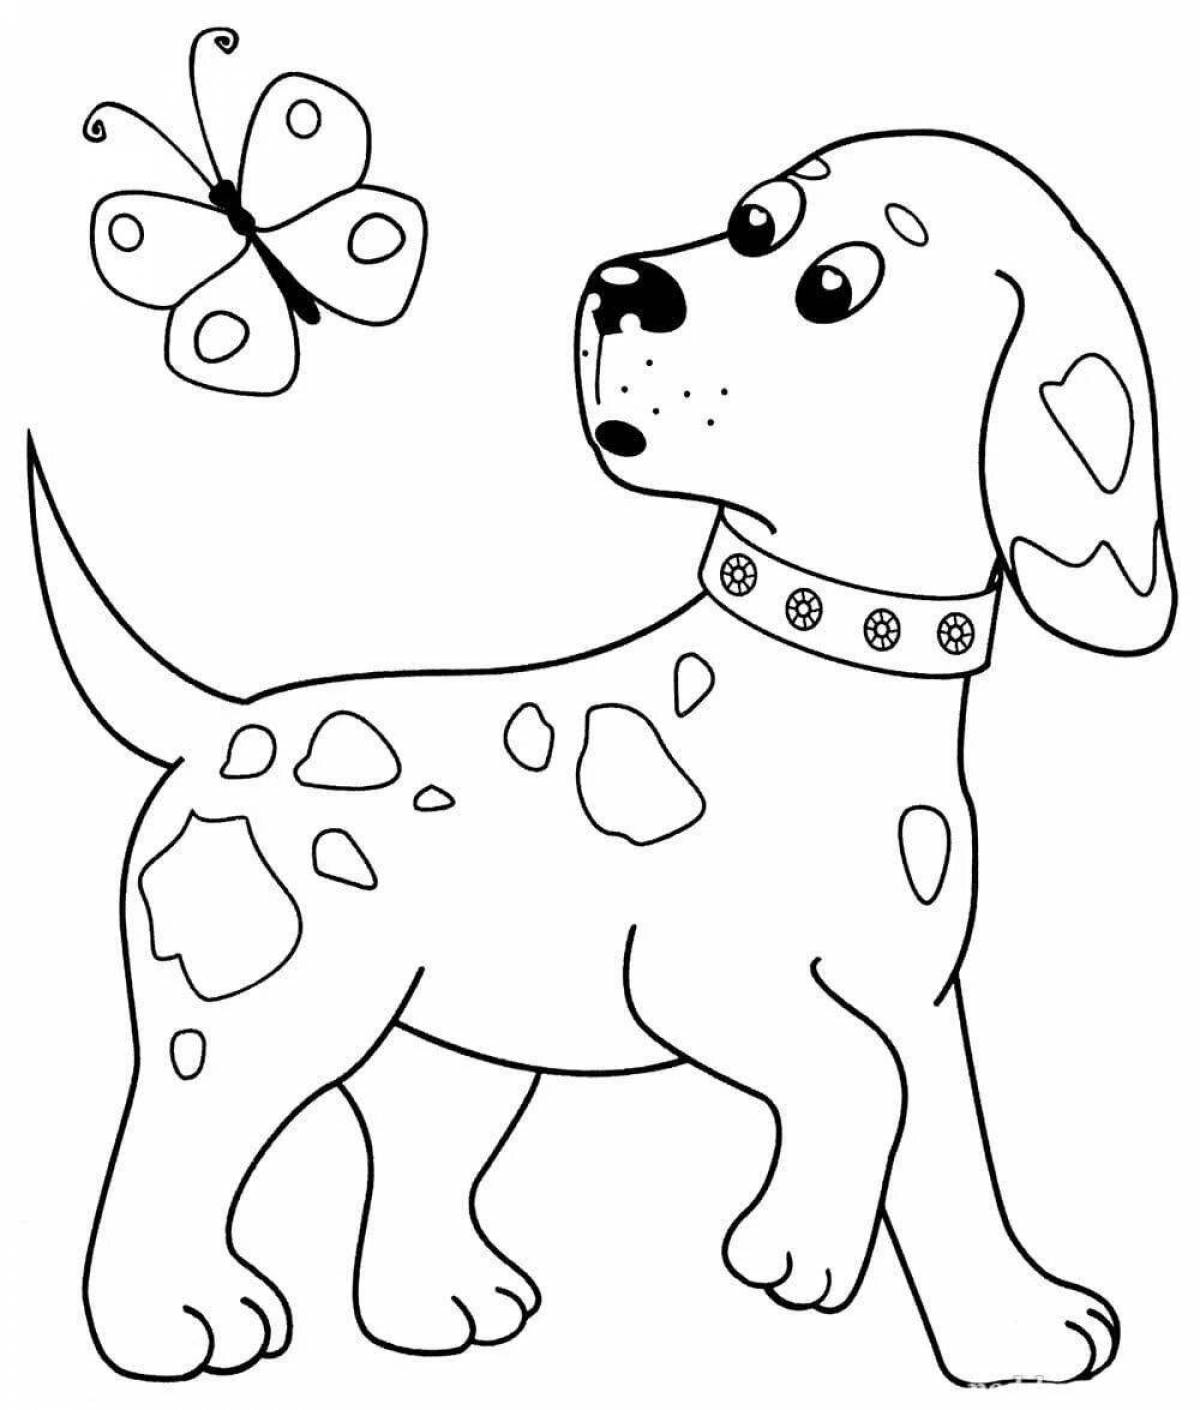 Irresistible dog coloring book for kids 2-3 years old